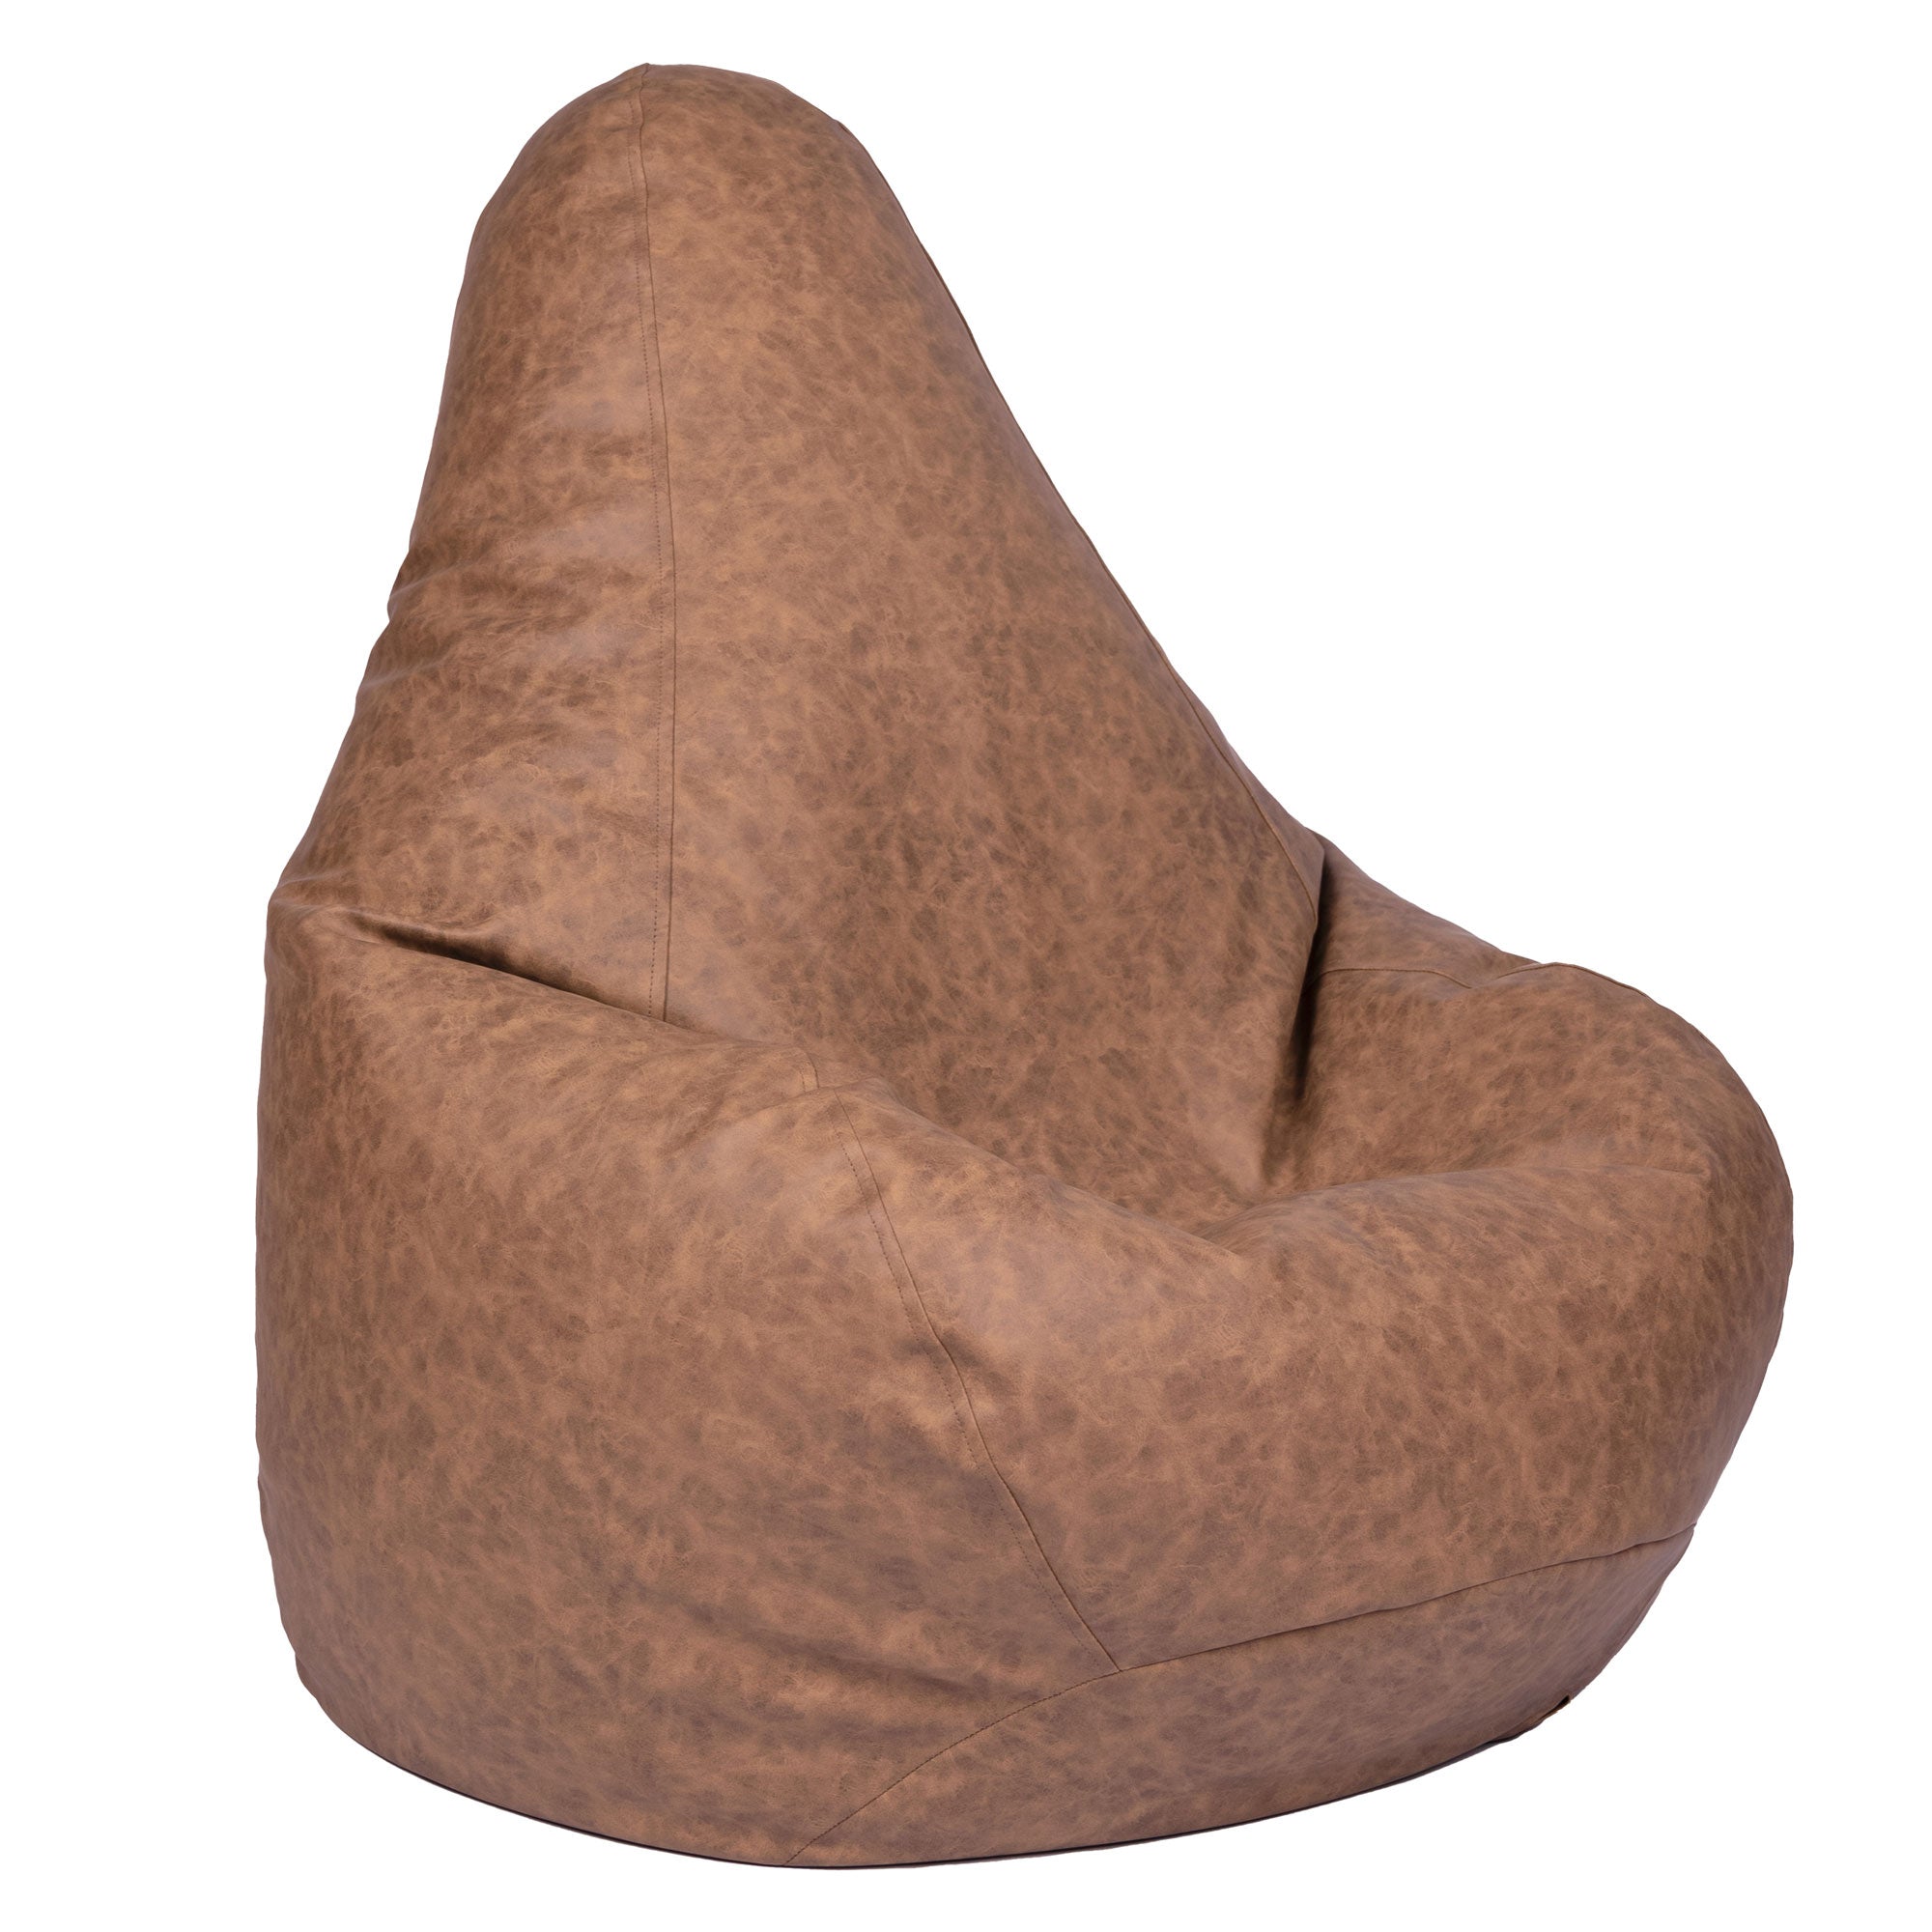 Luxurious High Back Artificial leather Bean Bag